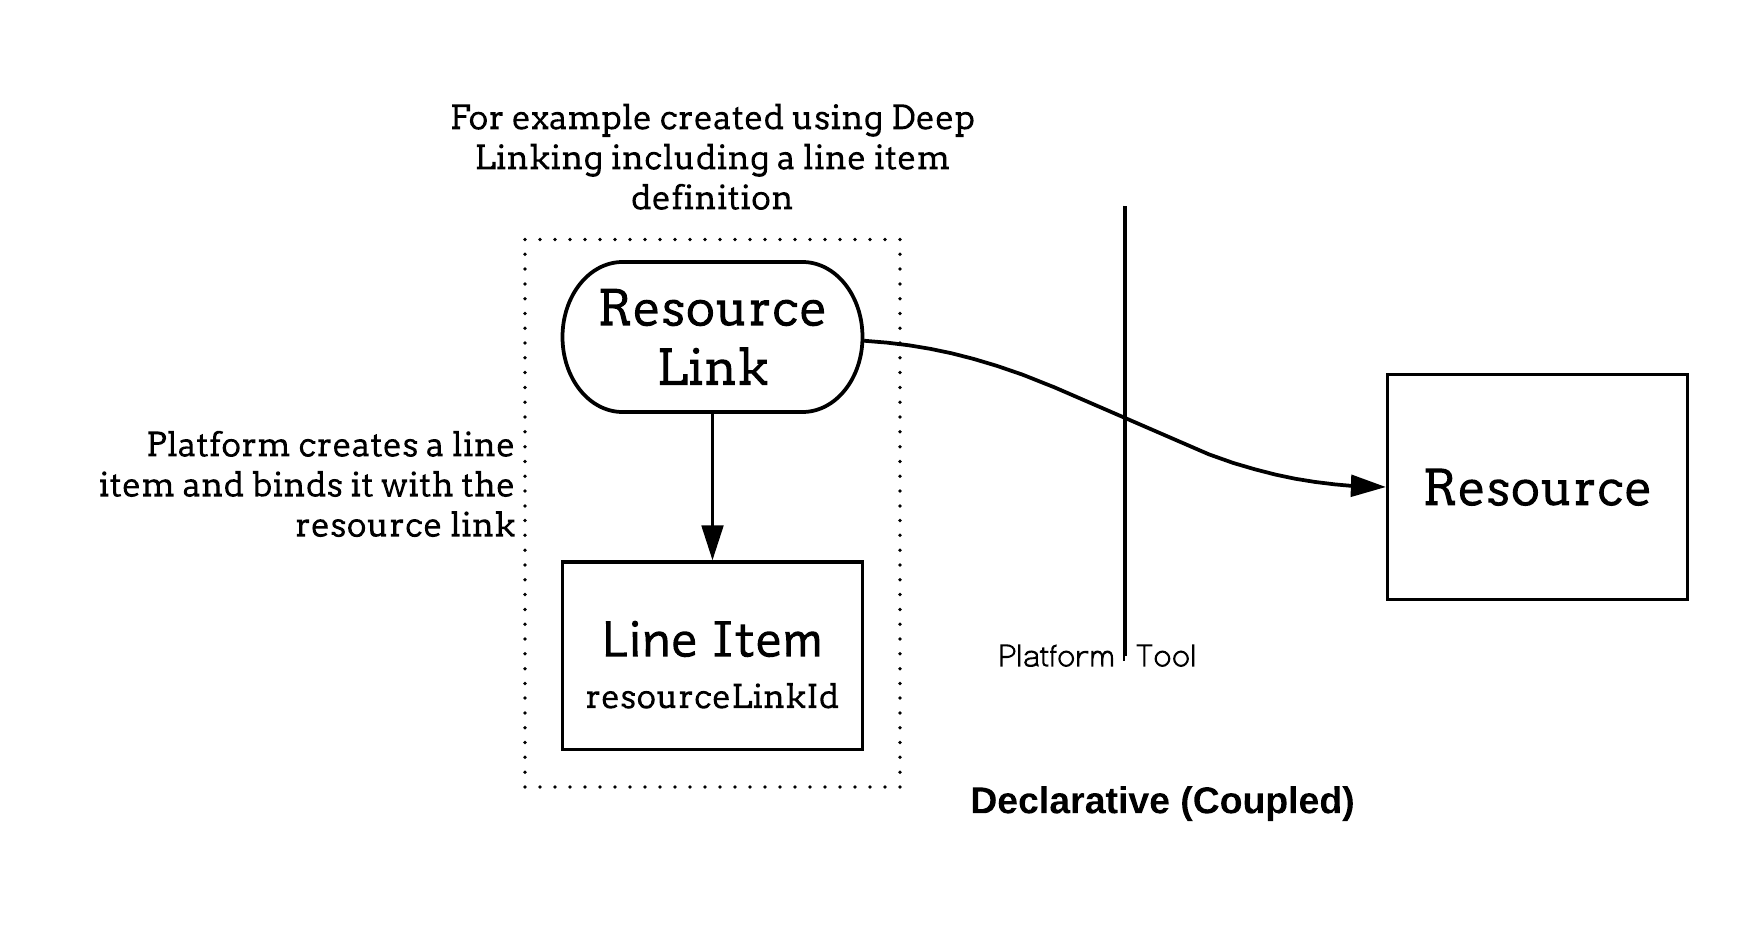 Illustrates the lifecycle of the line item